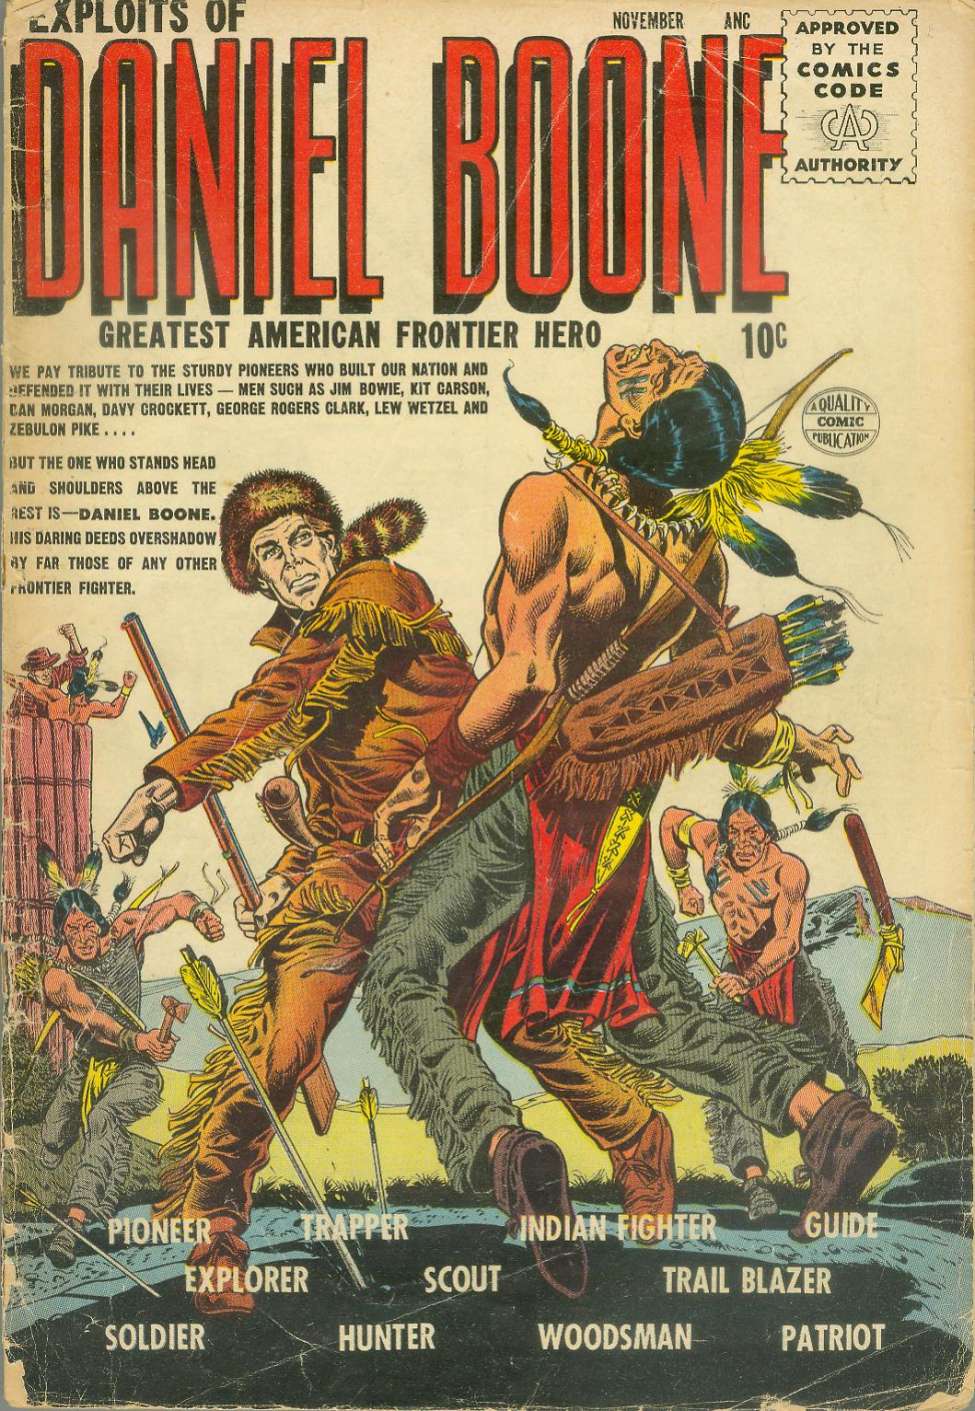 Comic Book Cover For Exploits of Daniel Boone 1